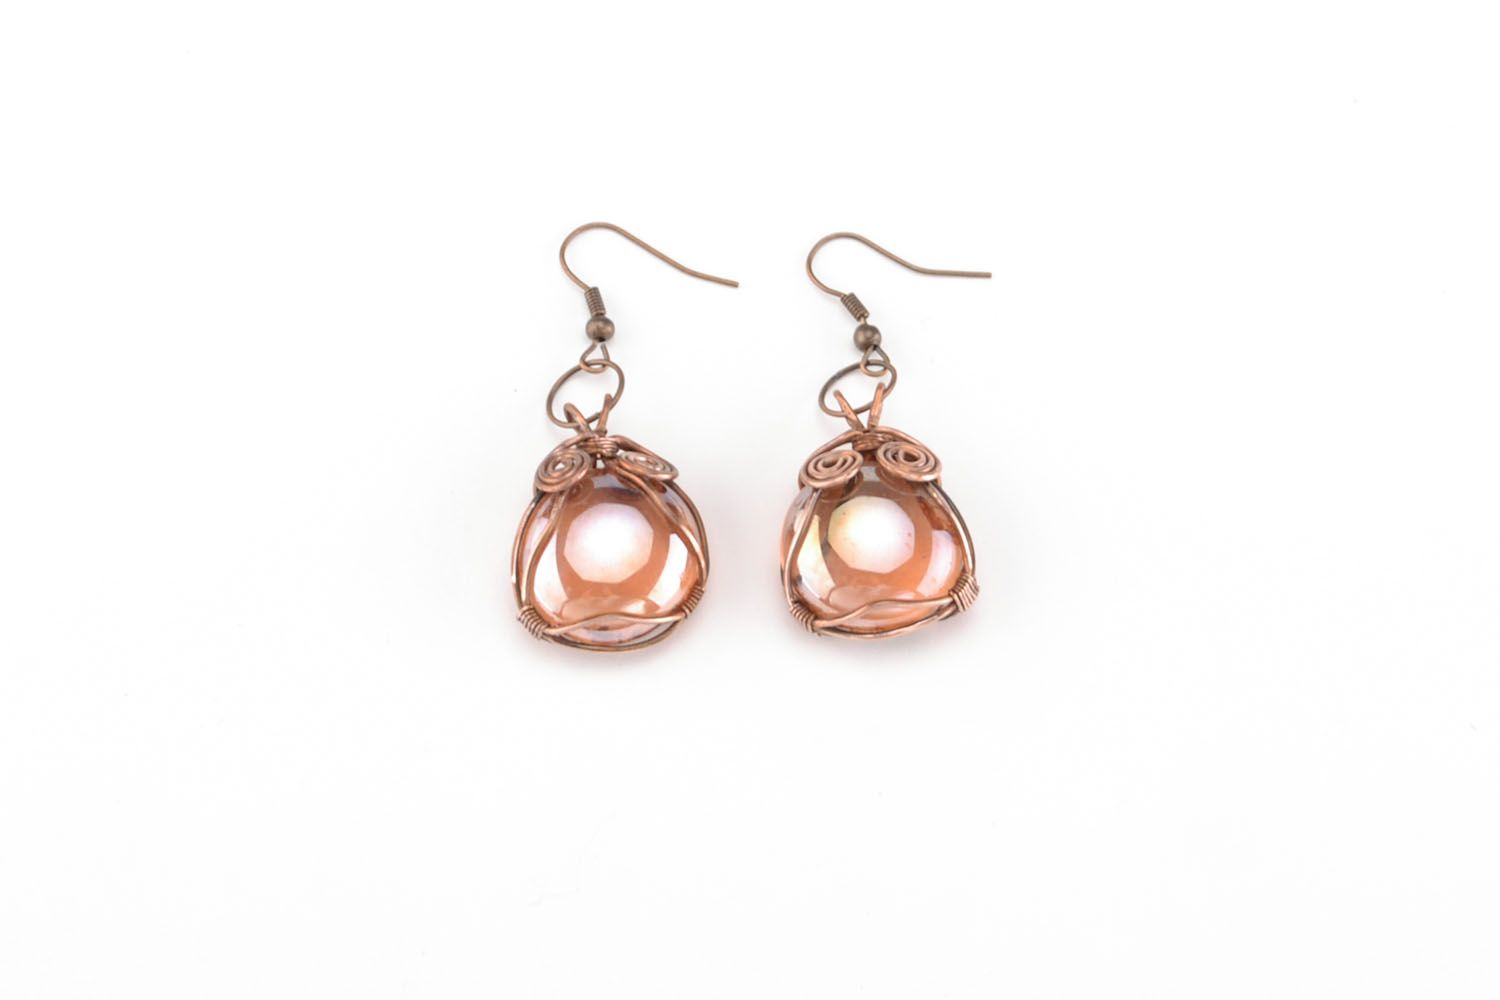 Copper earrings with glass beads photo 2